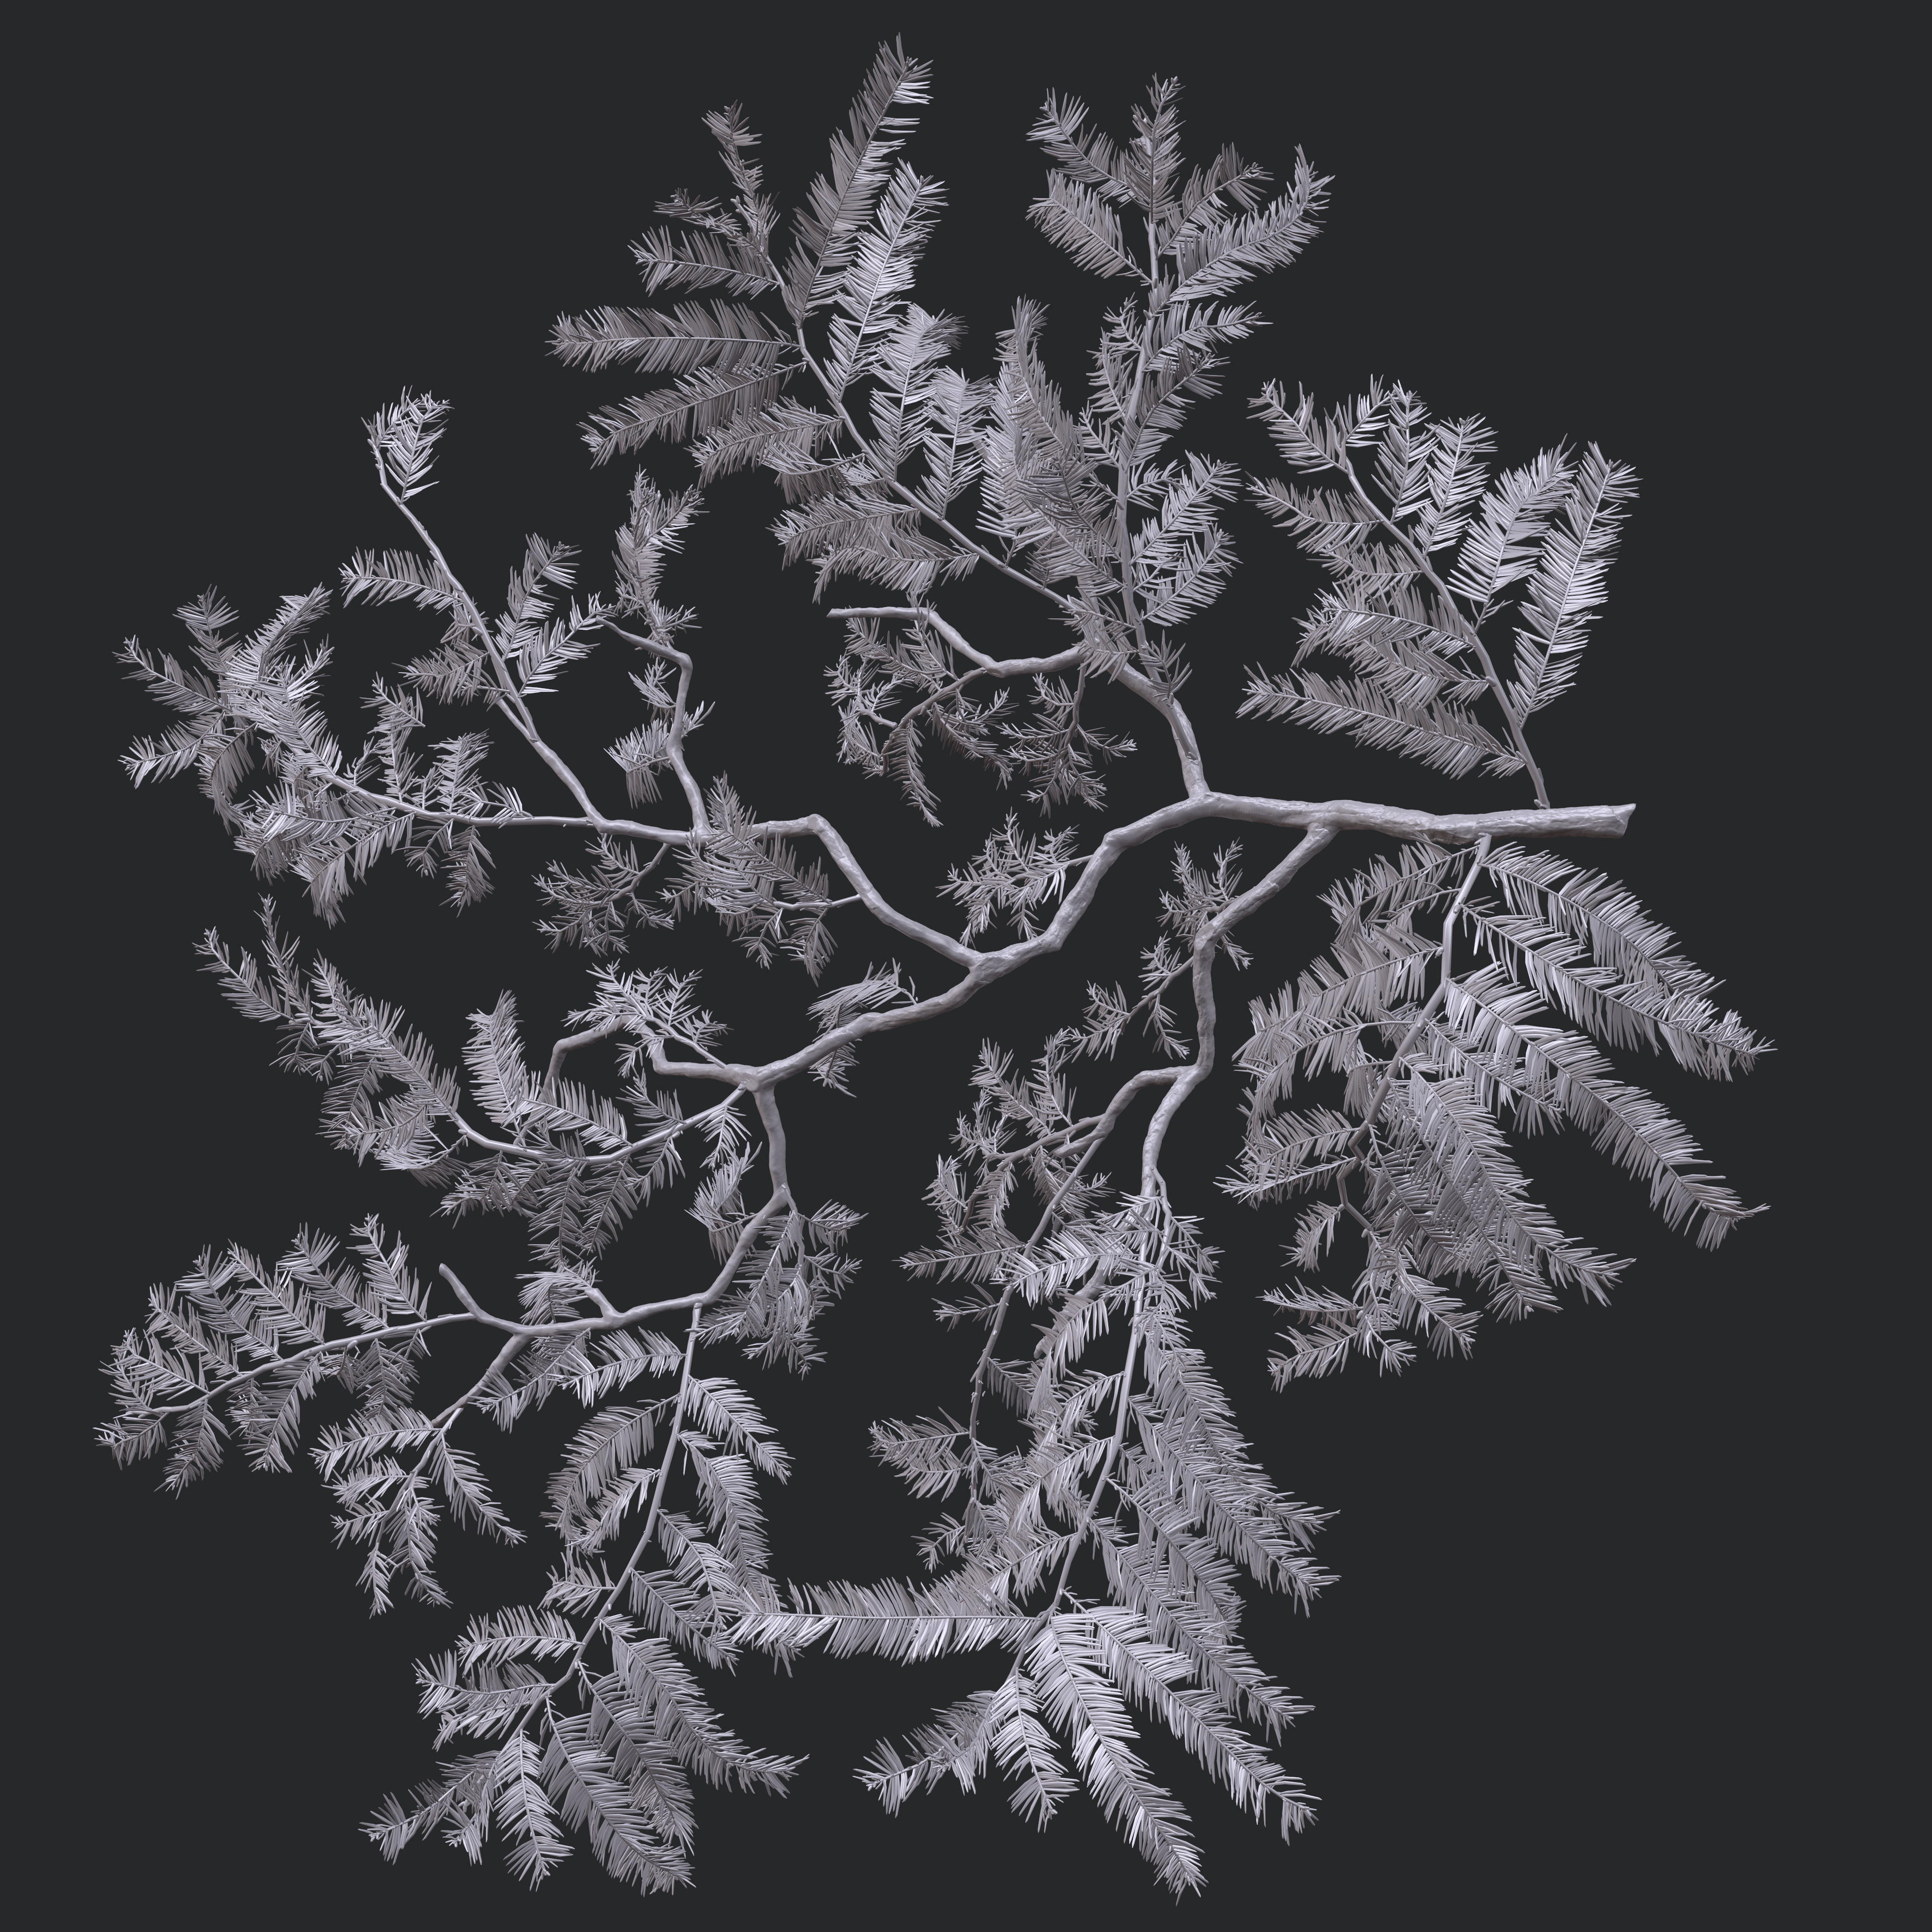 High poly branch which consists of both the branches made in Maya as well as the big branch sculpted in Zbrush.